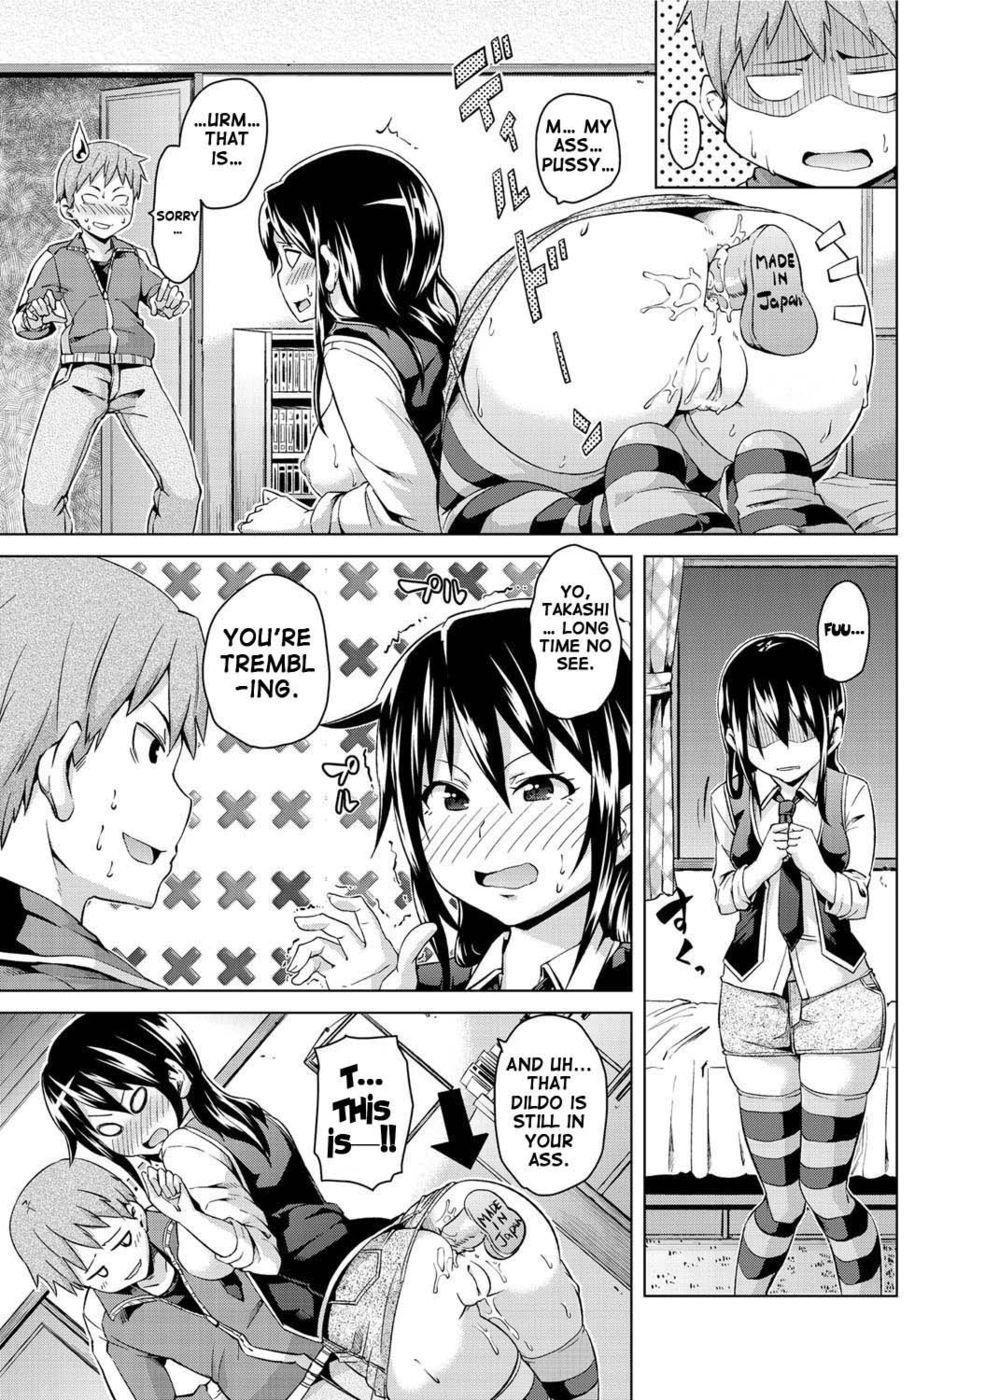 Hentai Manga Comic-Cheating Should Be Done With The Ass-Read-5